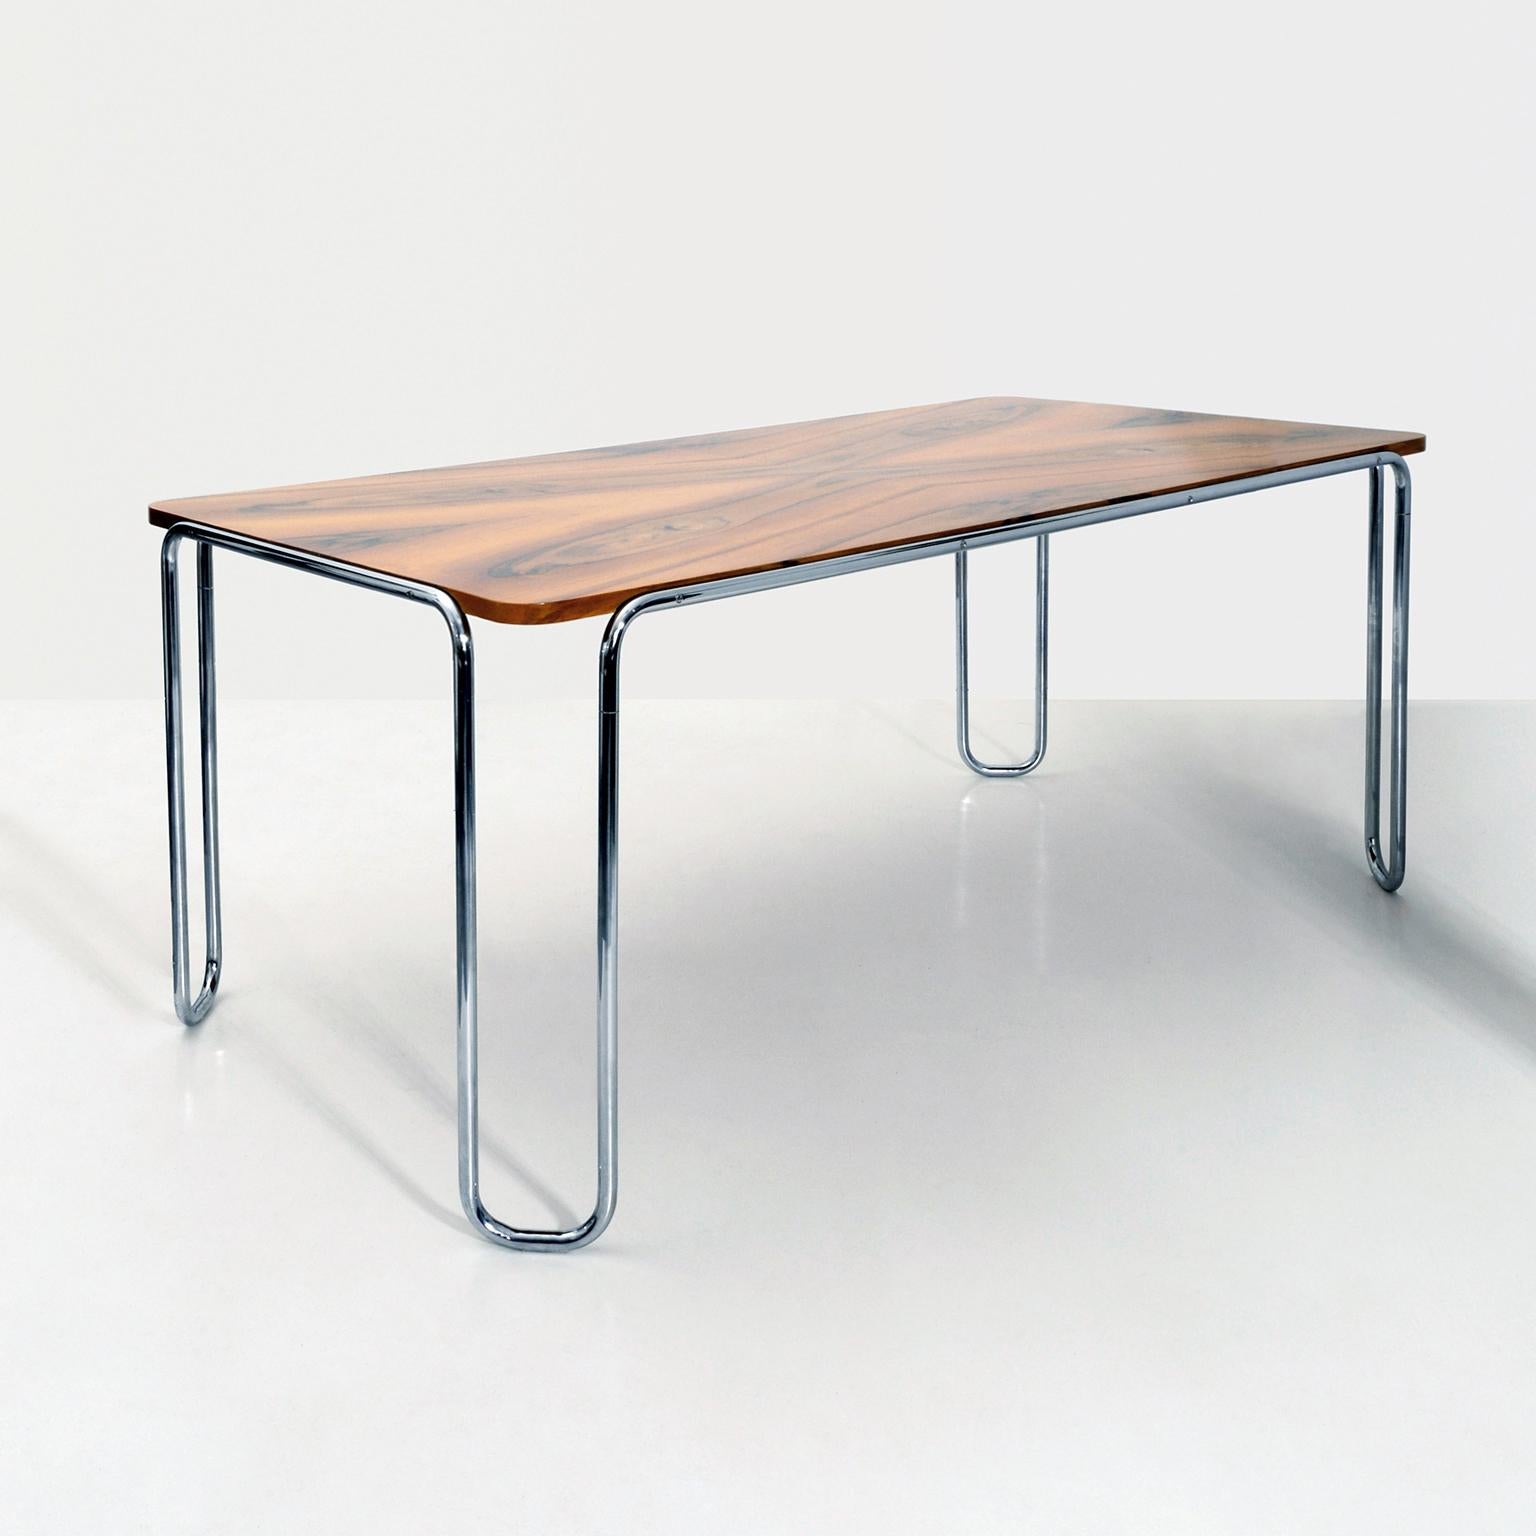 Modernist ultra-thin tubular-steel table, customisable. Delivery time: 6-8 weeks.